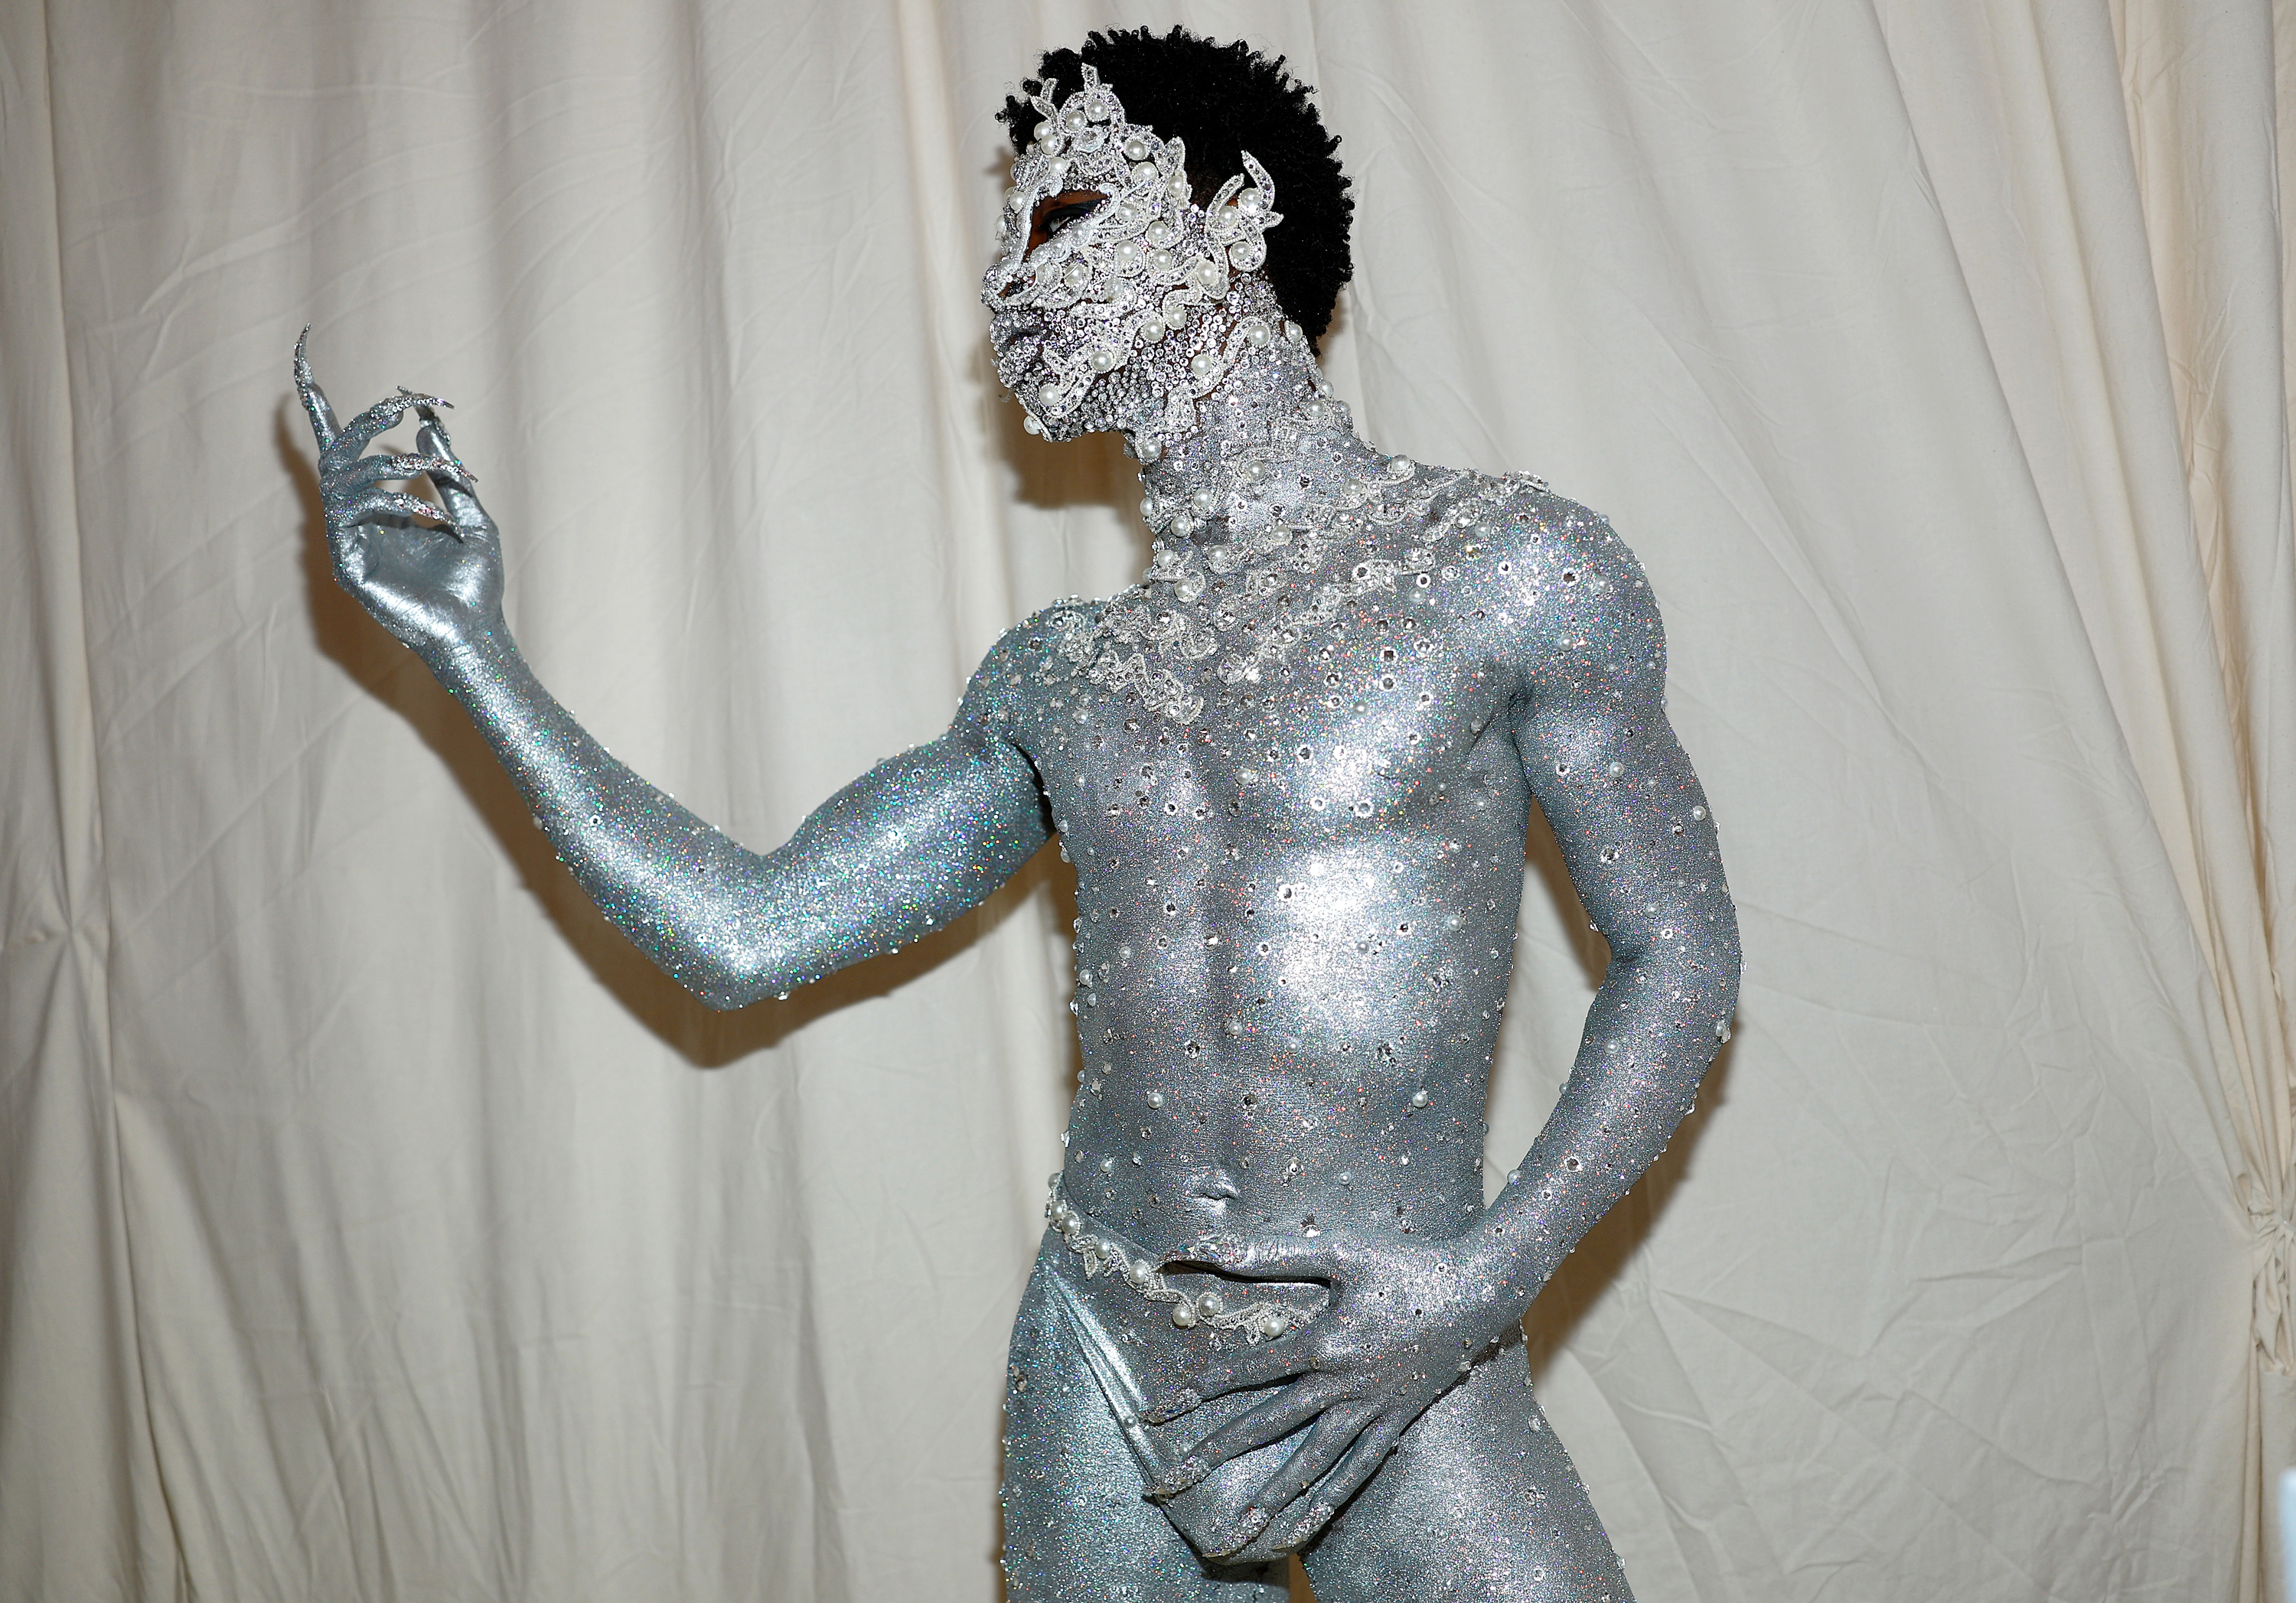 15) Lil Nas X, covered in rhinestones and pearls, shines on the Met Gala  carpet